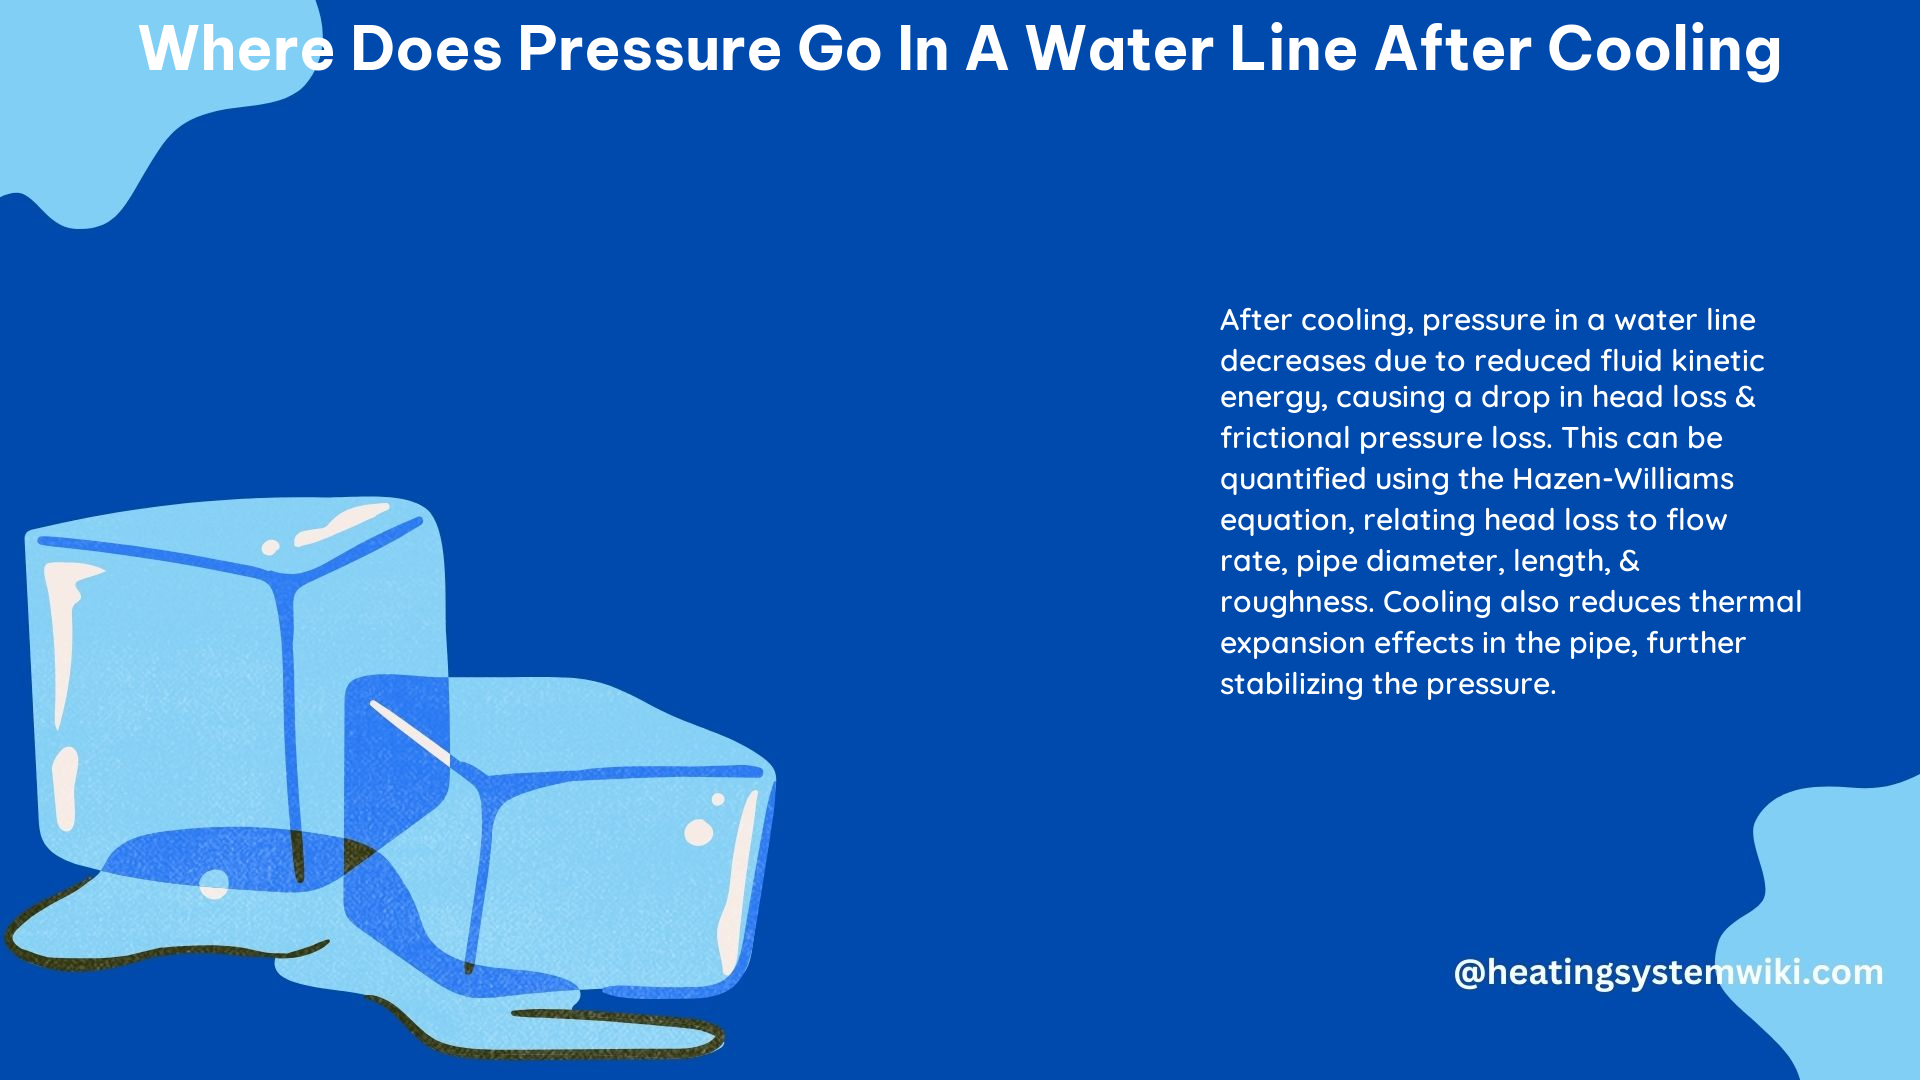 Where Does Pressure Go In a Water Line After Cooling